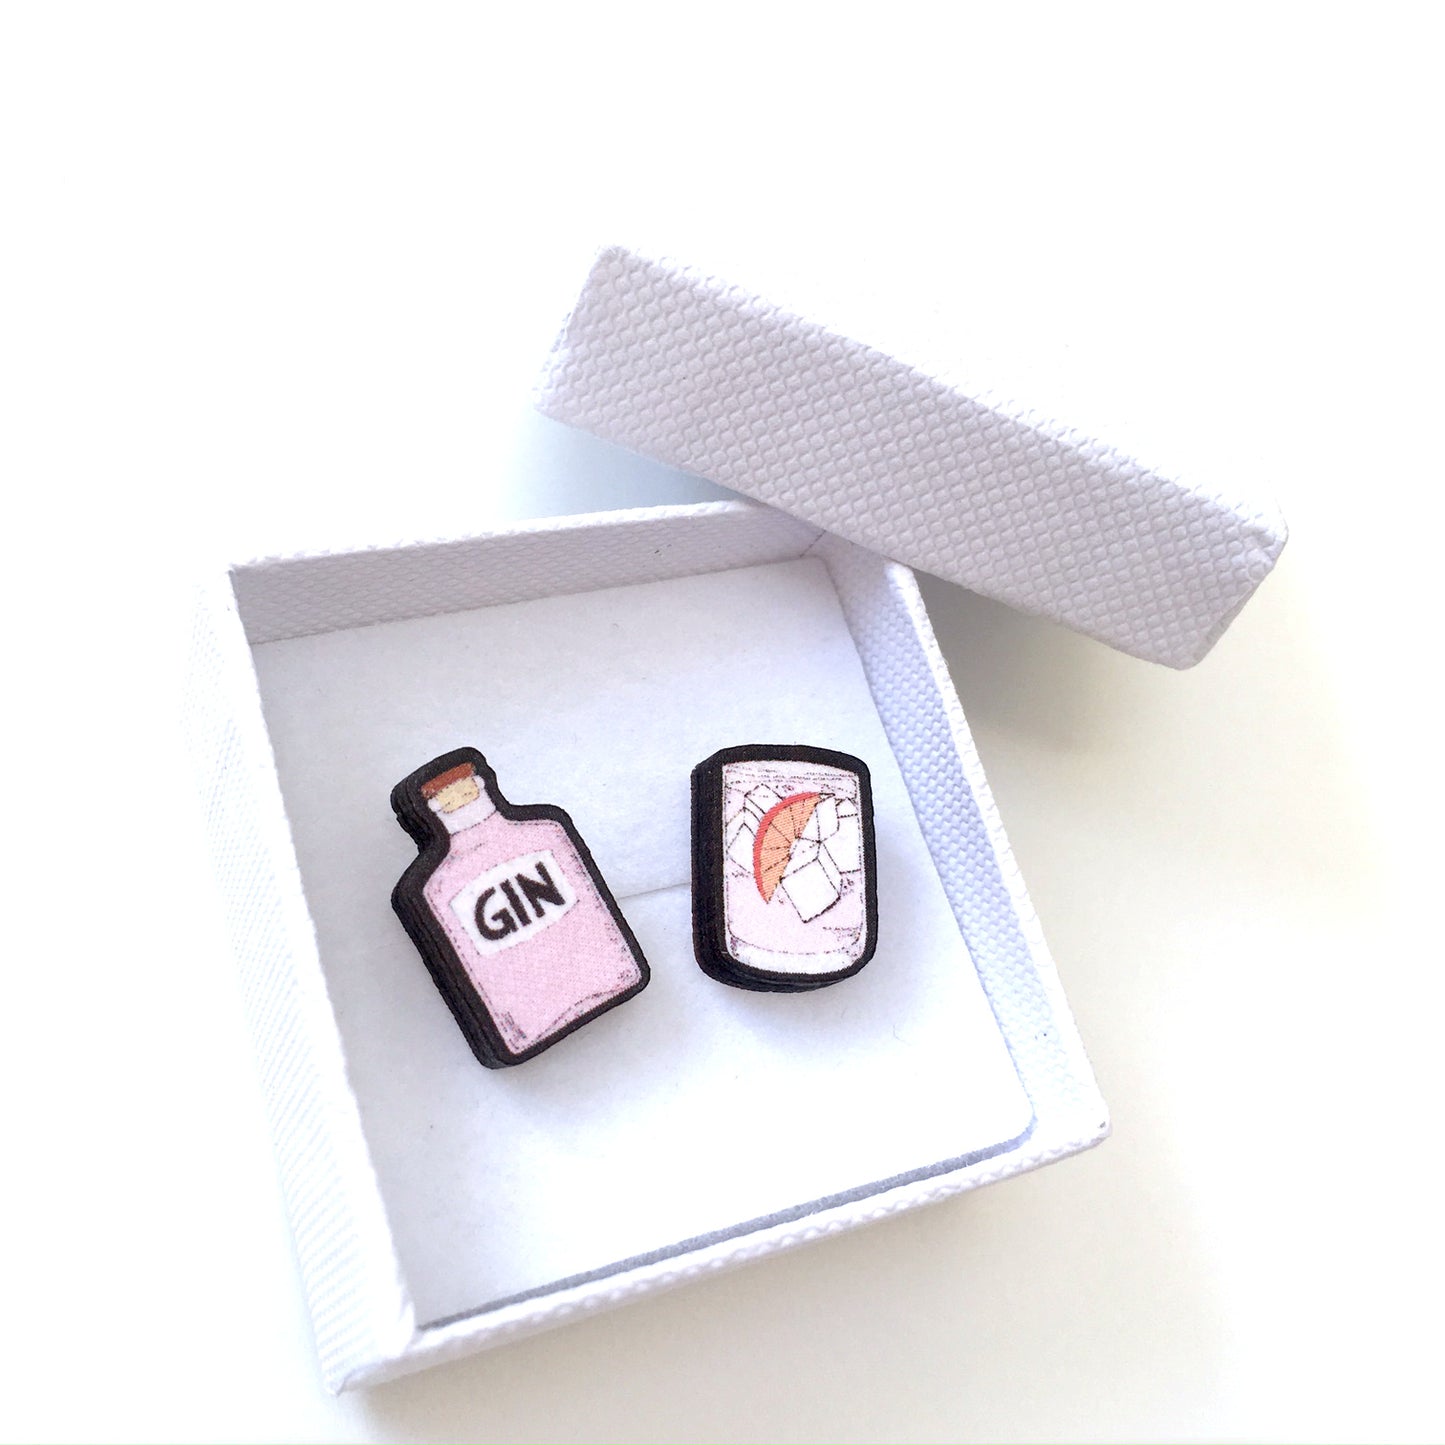 Pink gin and tonic mismatch stud earrings